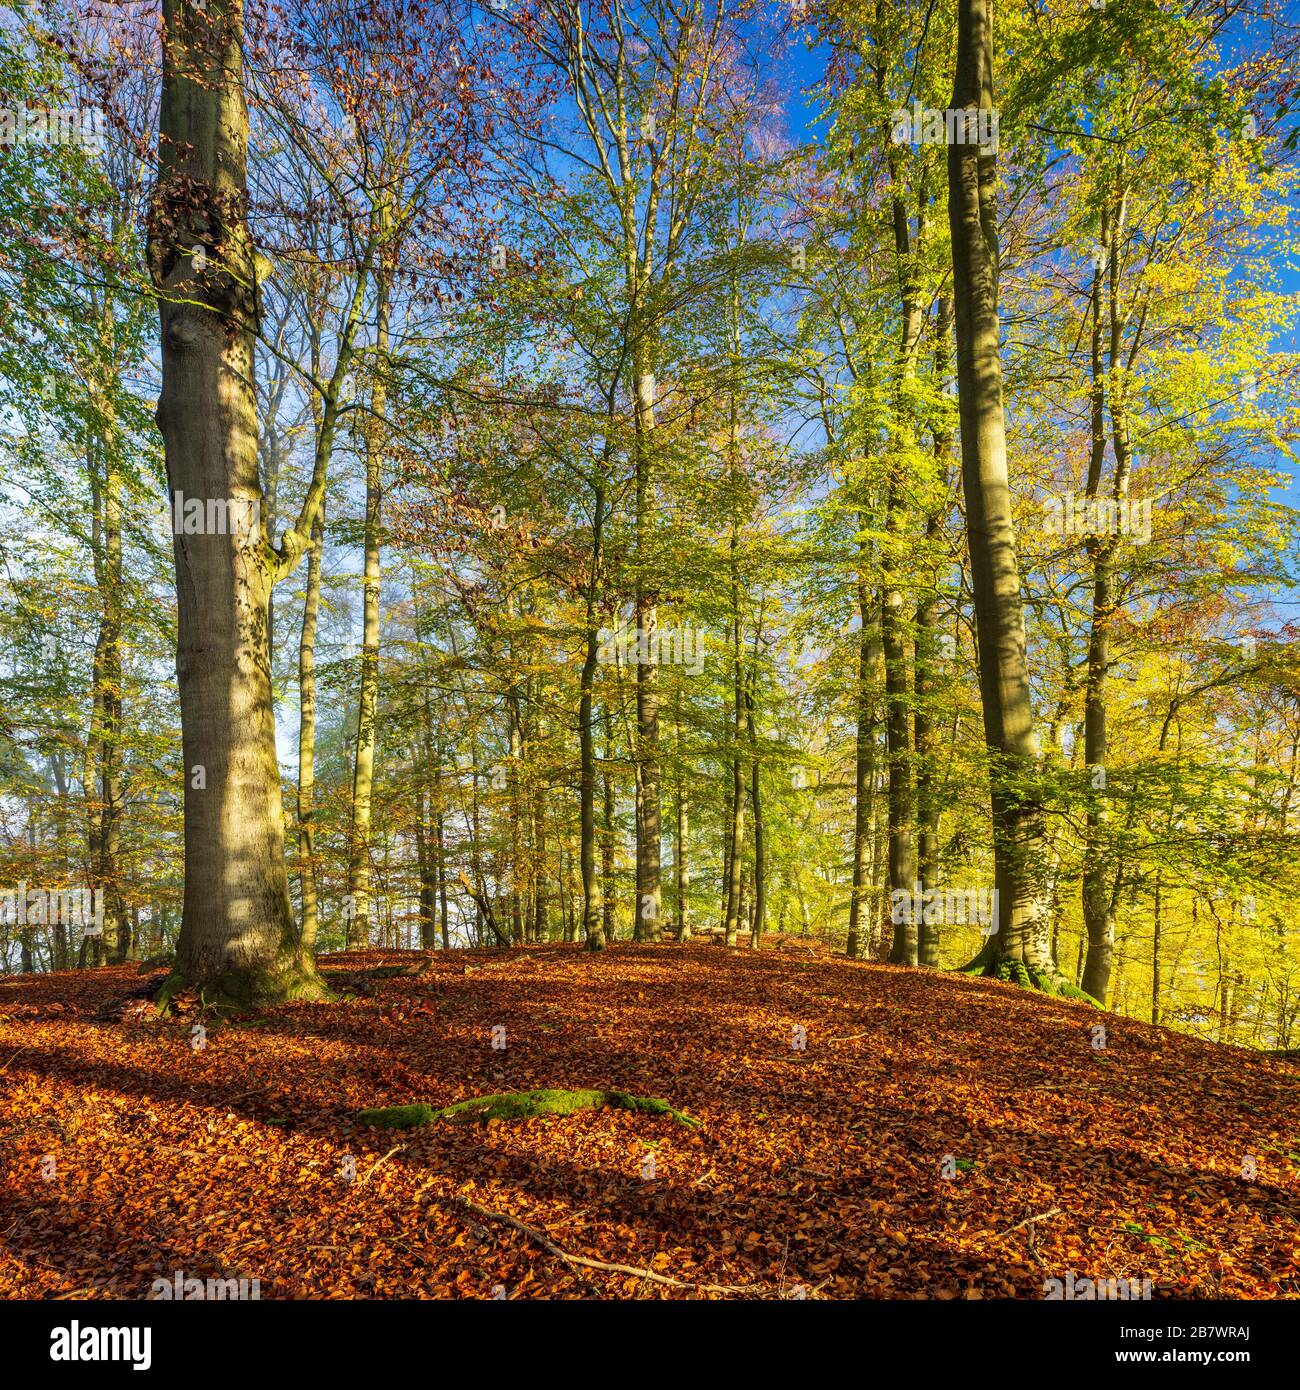 Sunny unspoilt beech forest in autumn, Mueritz National Park, Serrahn sub-area, UNESCO World Natural Heritage Site virgin beech forests of the Stock Photo